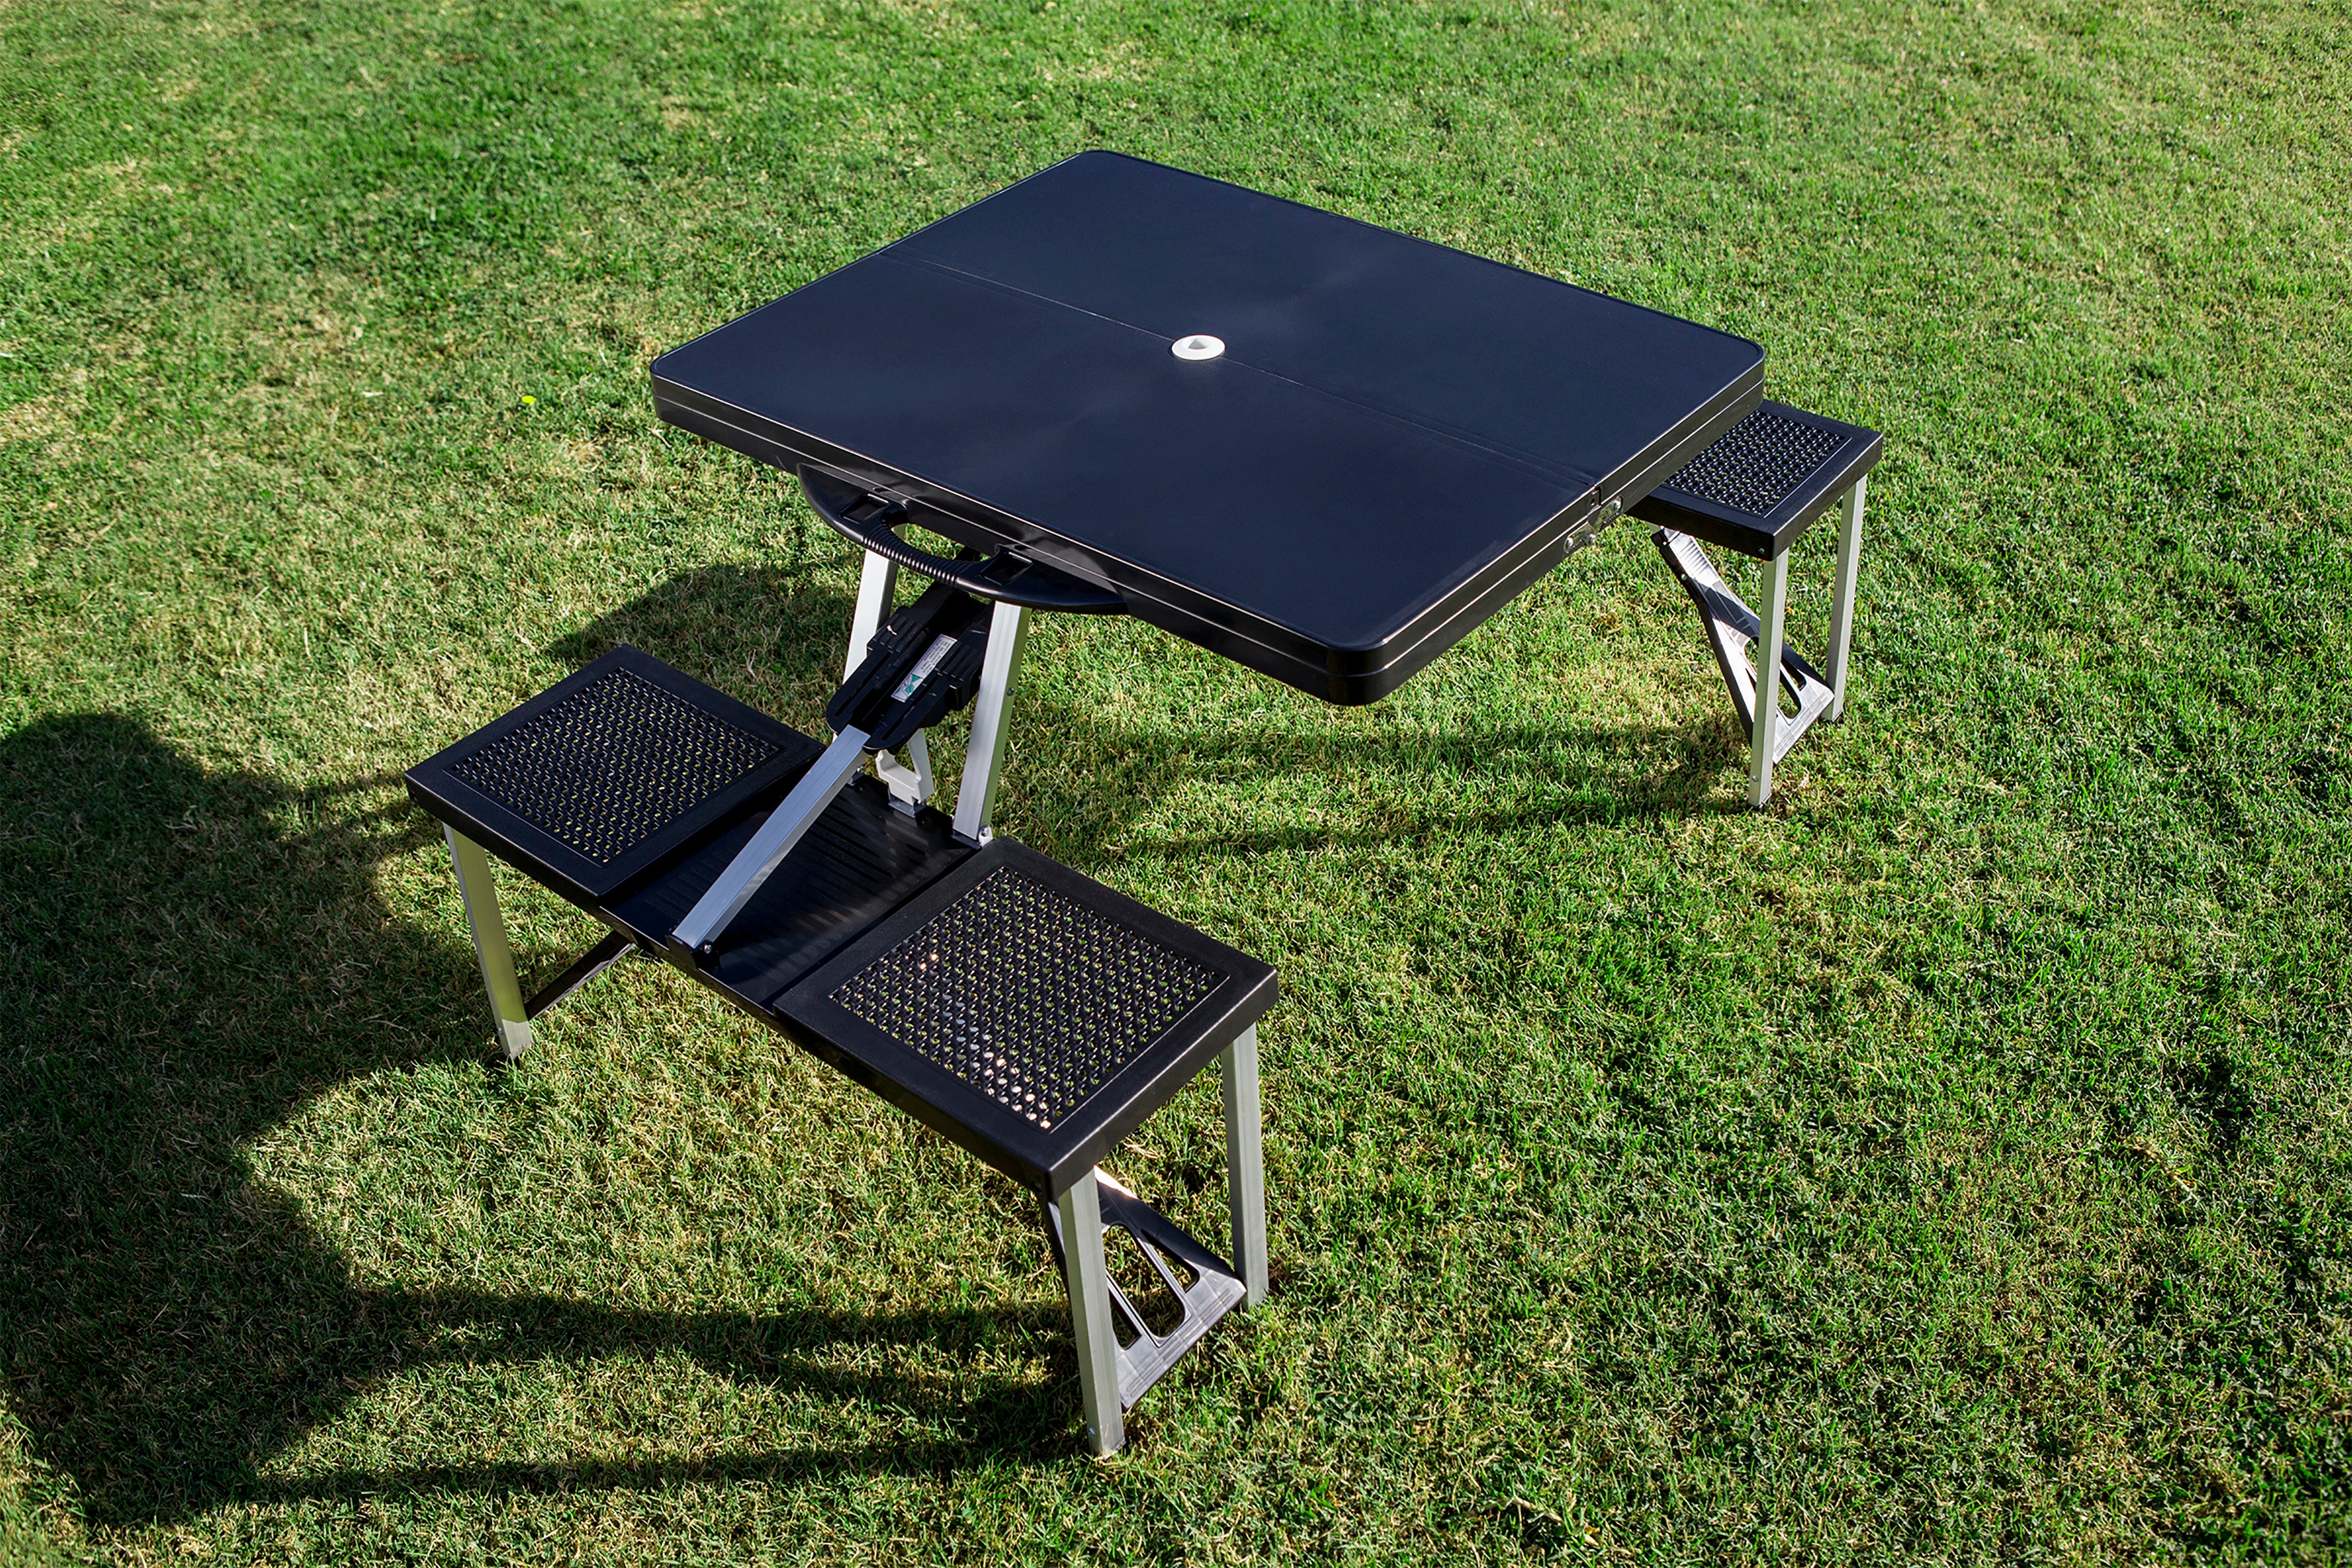 Hockey Rink - New York Rangers - Picnic Table Portable Folding Table with Seats